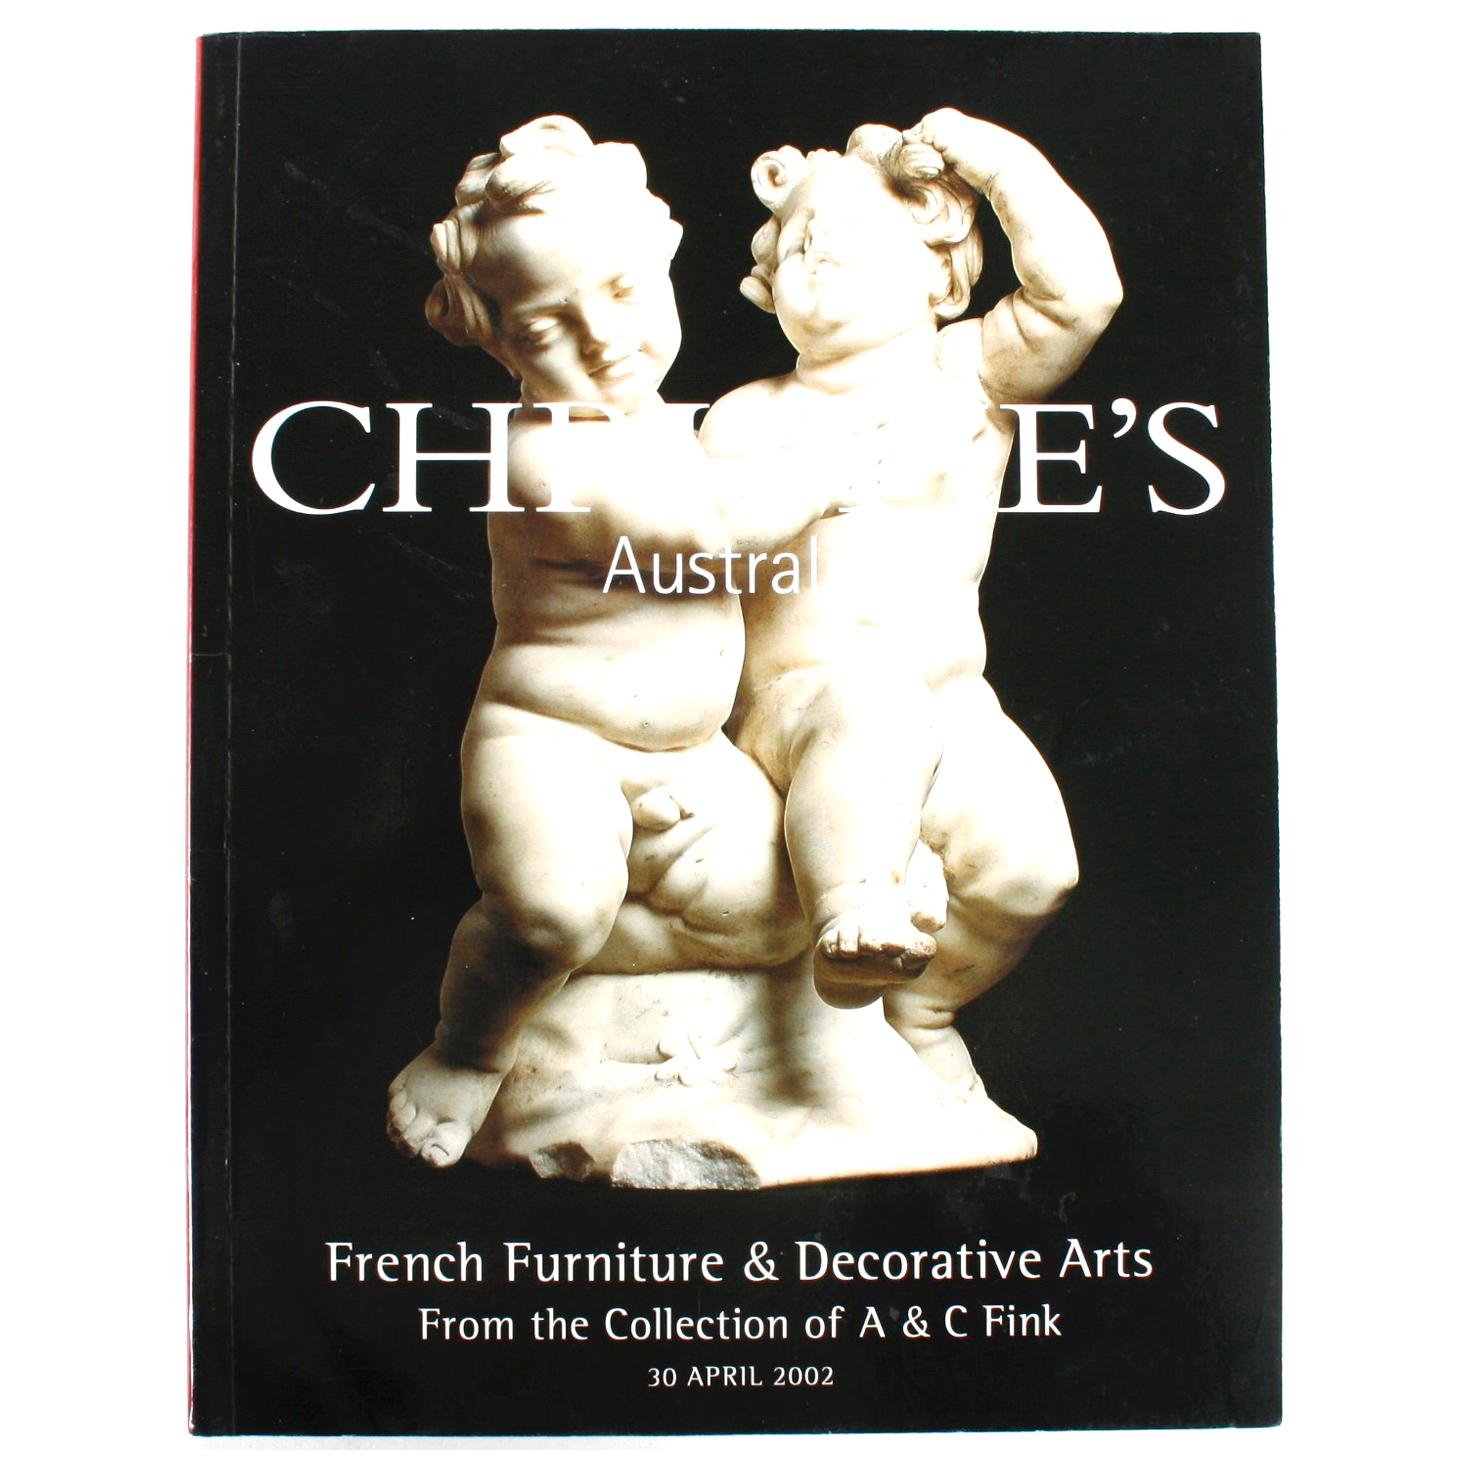 Christies avril 2002 French Furniture & Decorative Arts, a & C Fink Collections